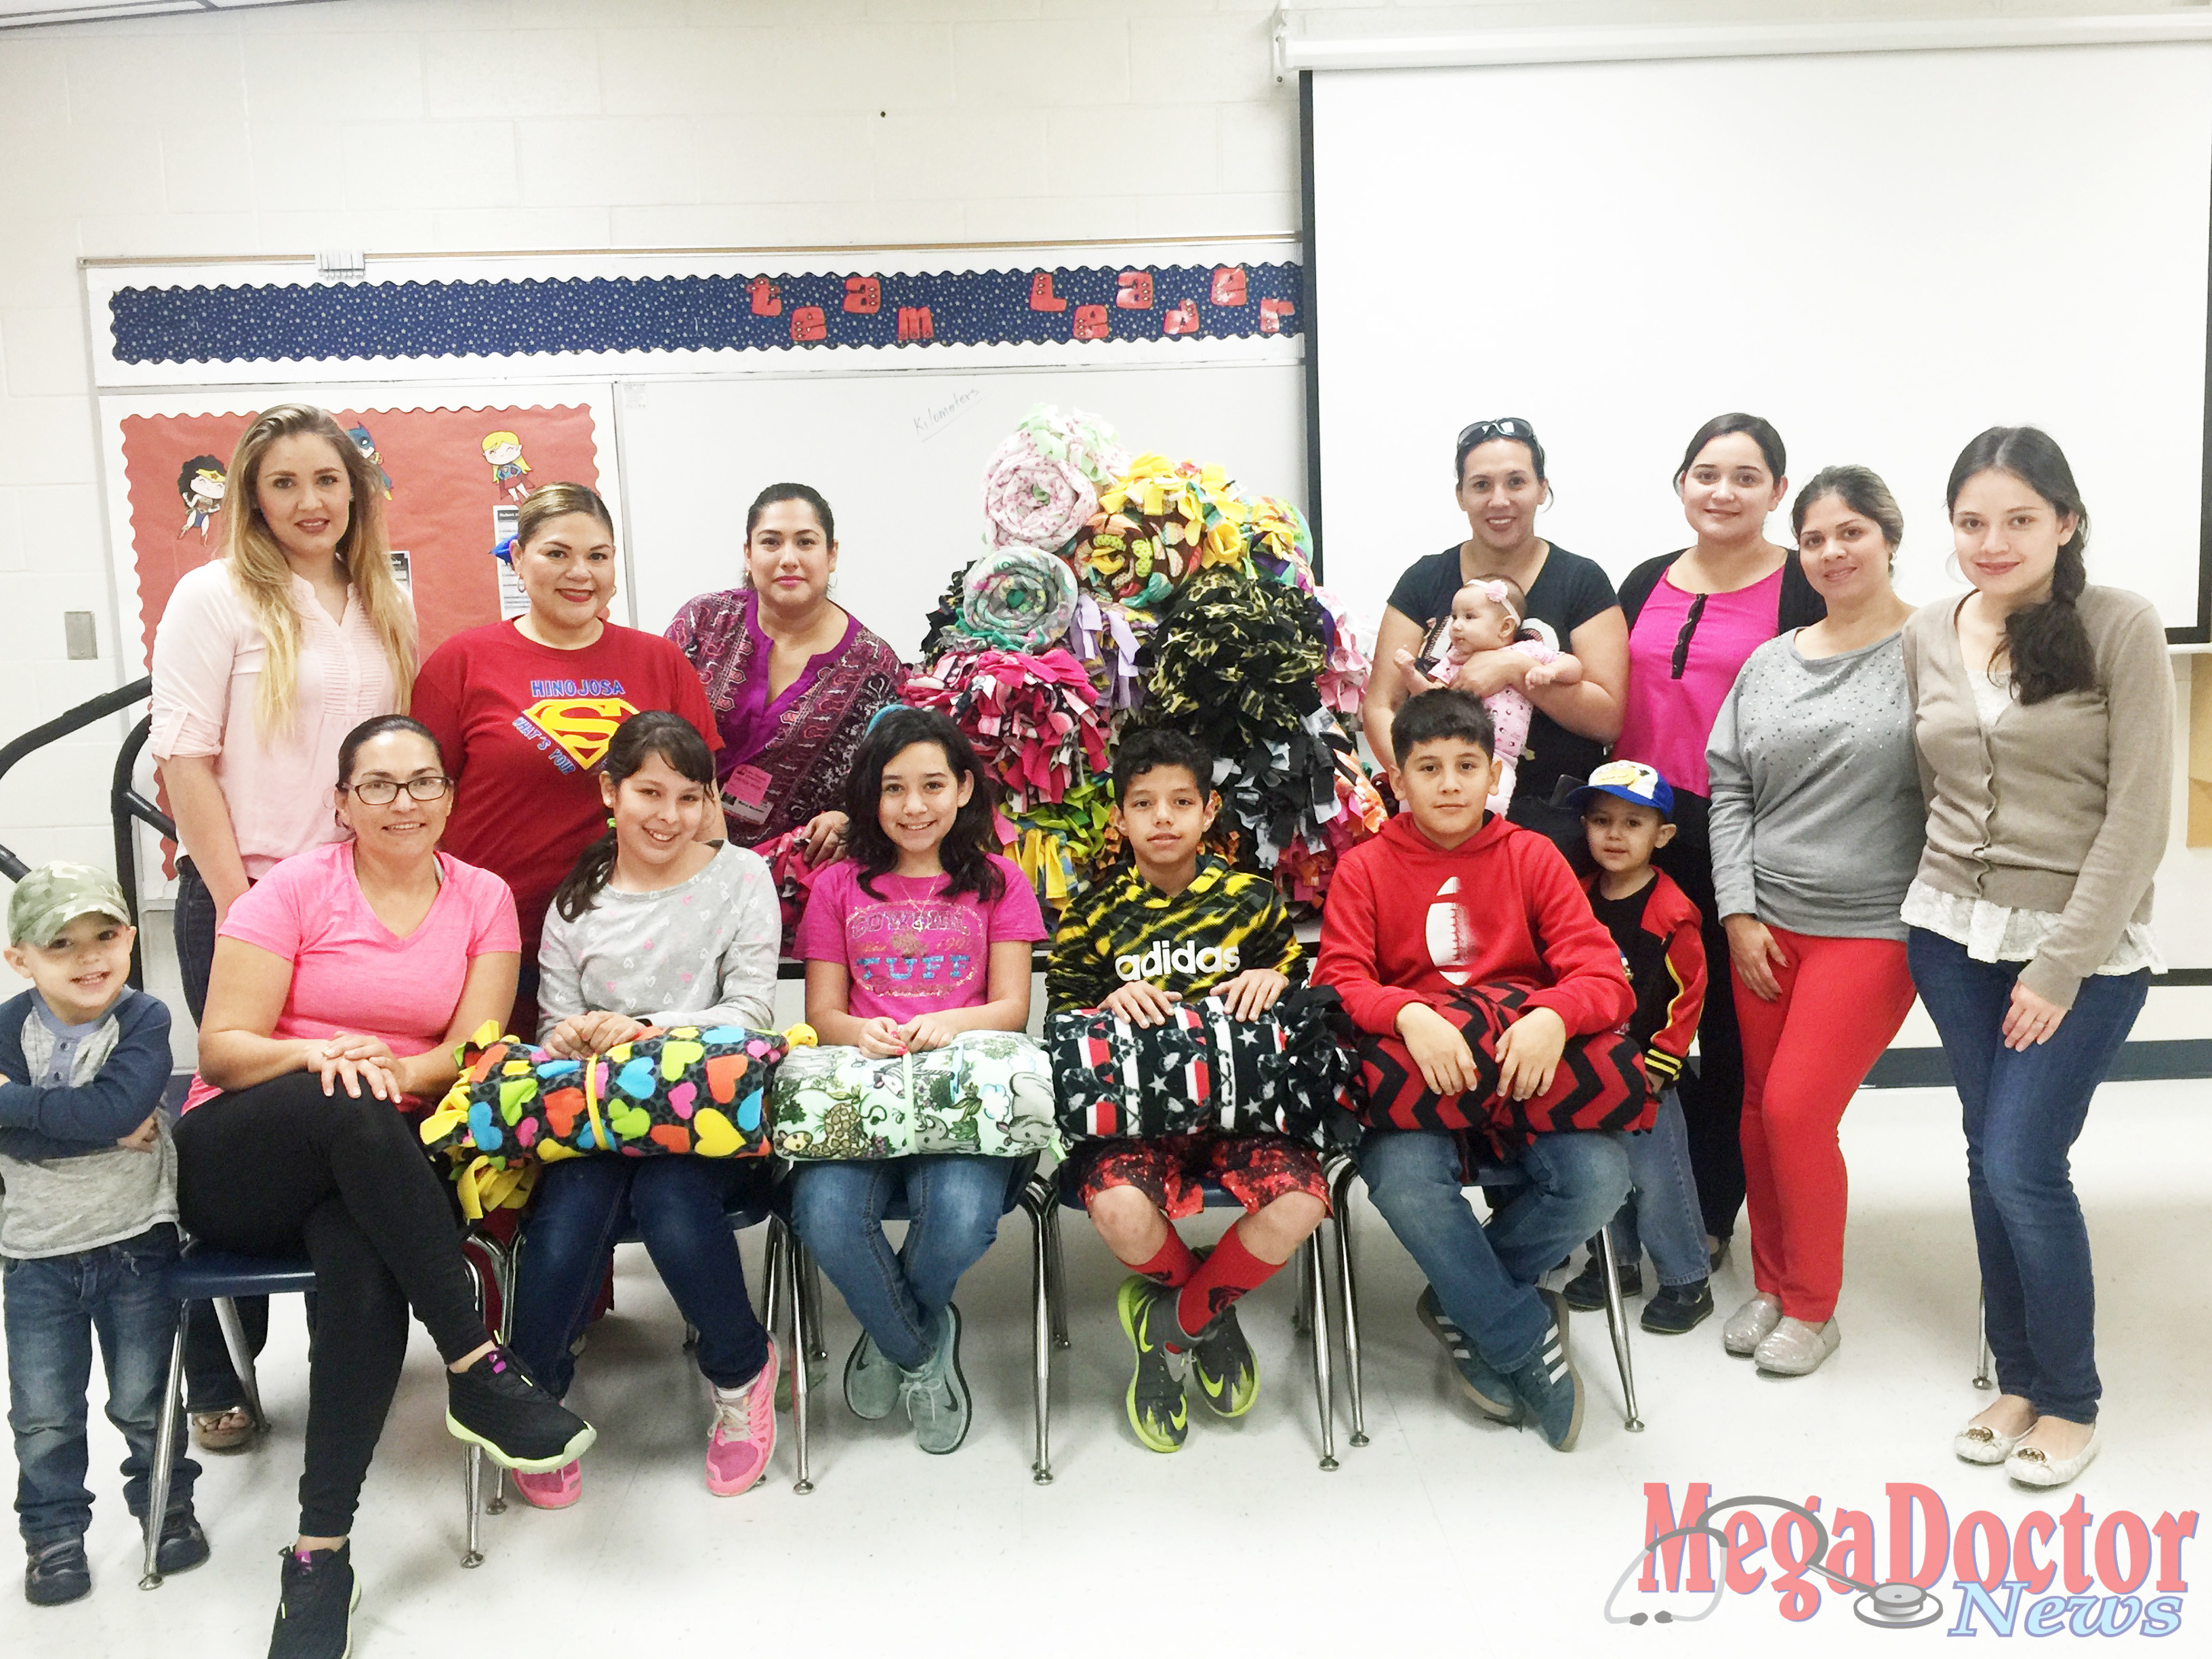 Students and parents from Ruben Hinojosa Elementary School in Sharyland ISD make knotted fleece blankets for pediatric patients at The Children’s Hospital at Renaissance.